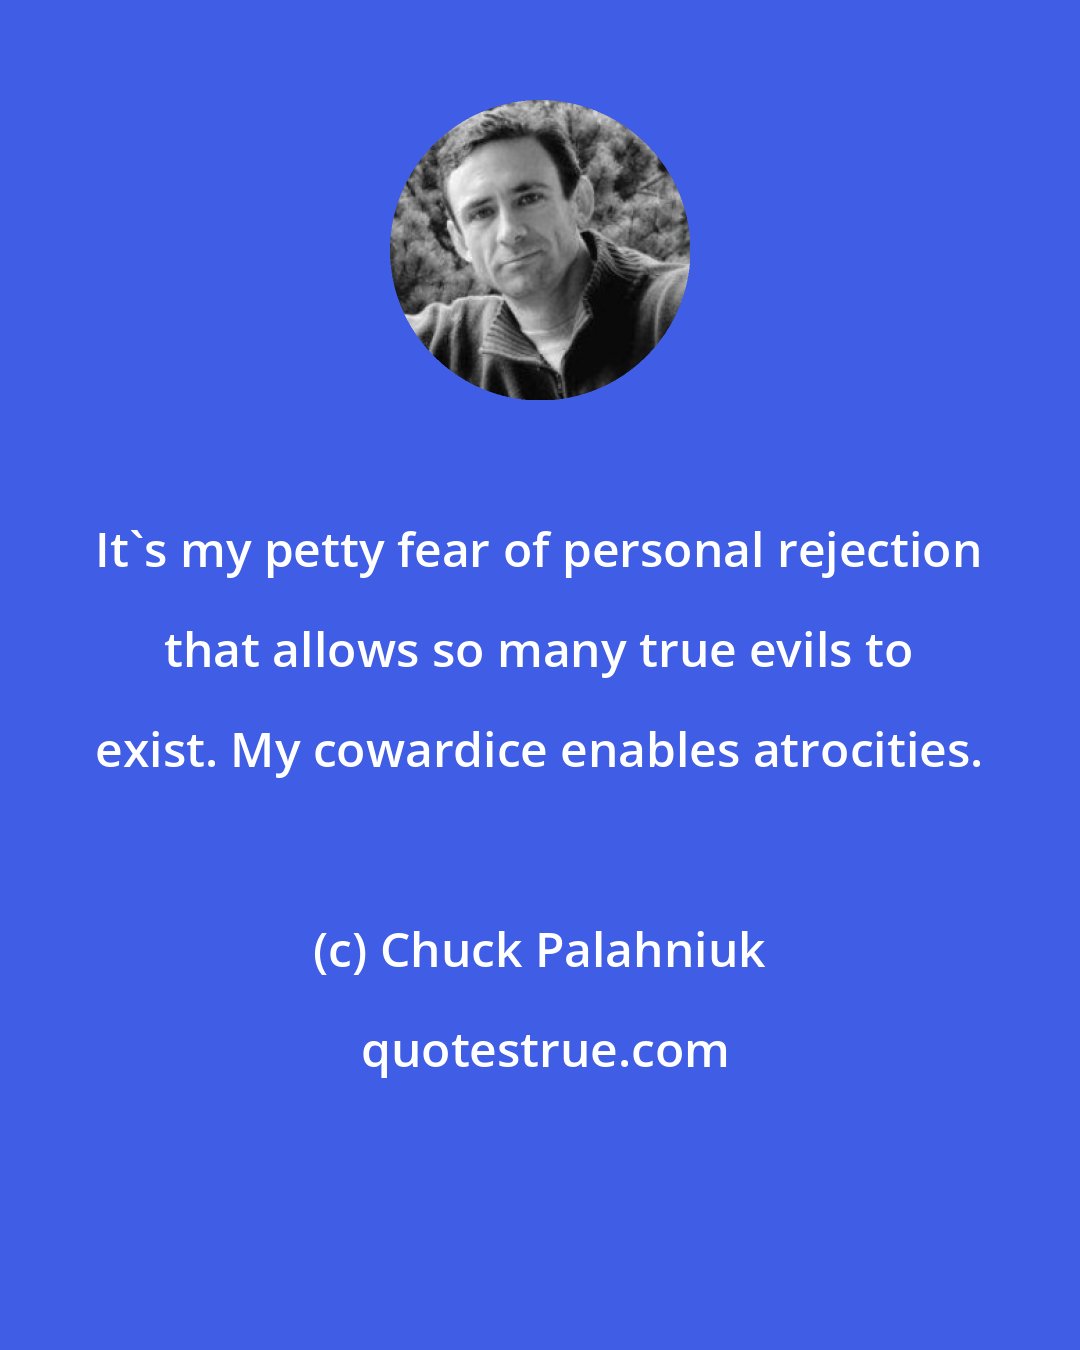 Chuck Palahniuk: It's my petty fear of personal rejection that allows so many true evils to exist. My cowardice enables atrocities.